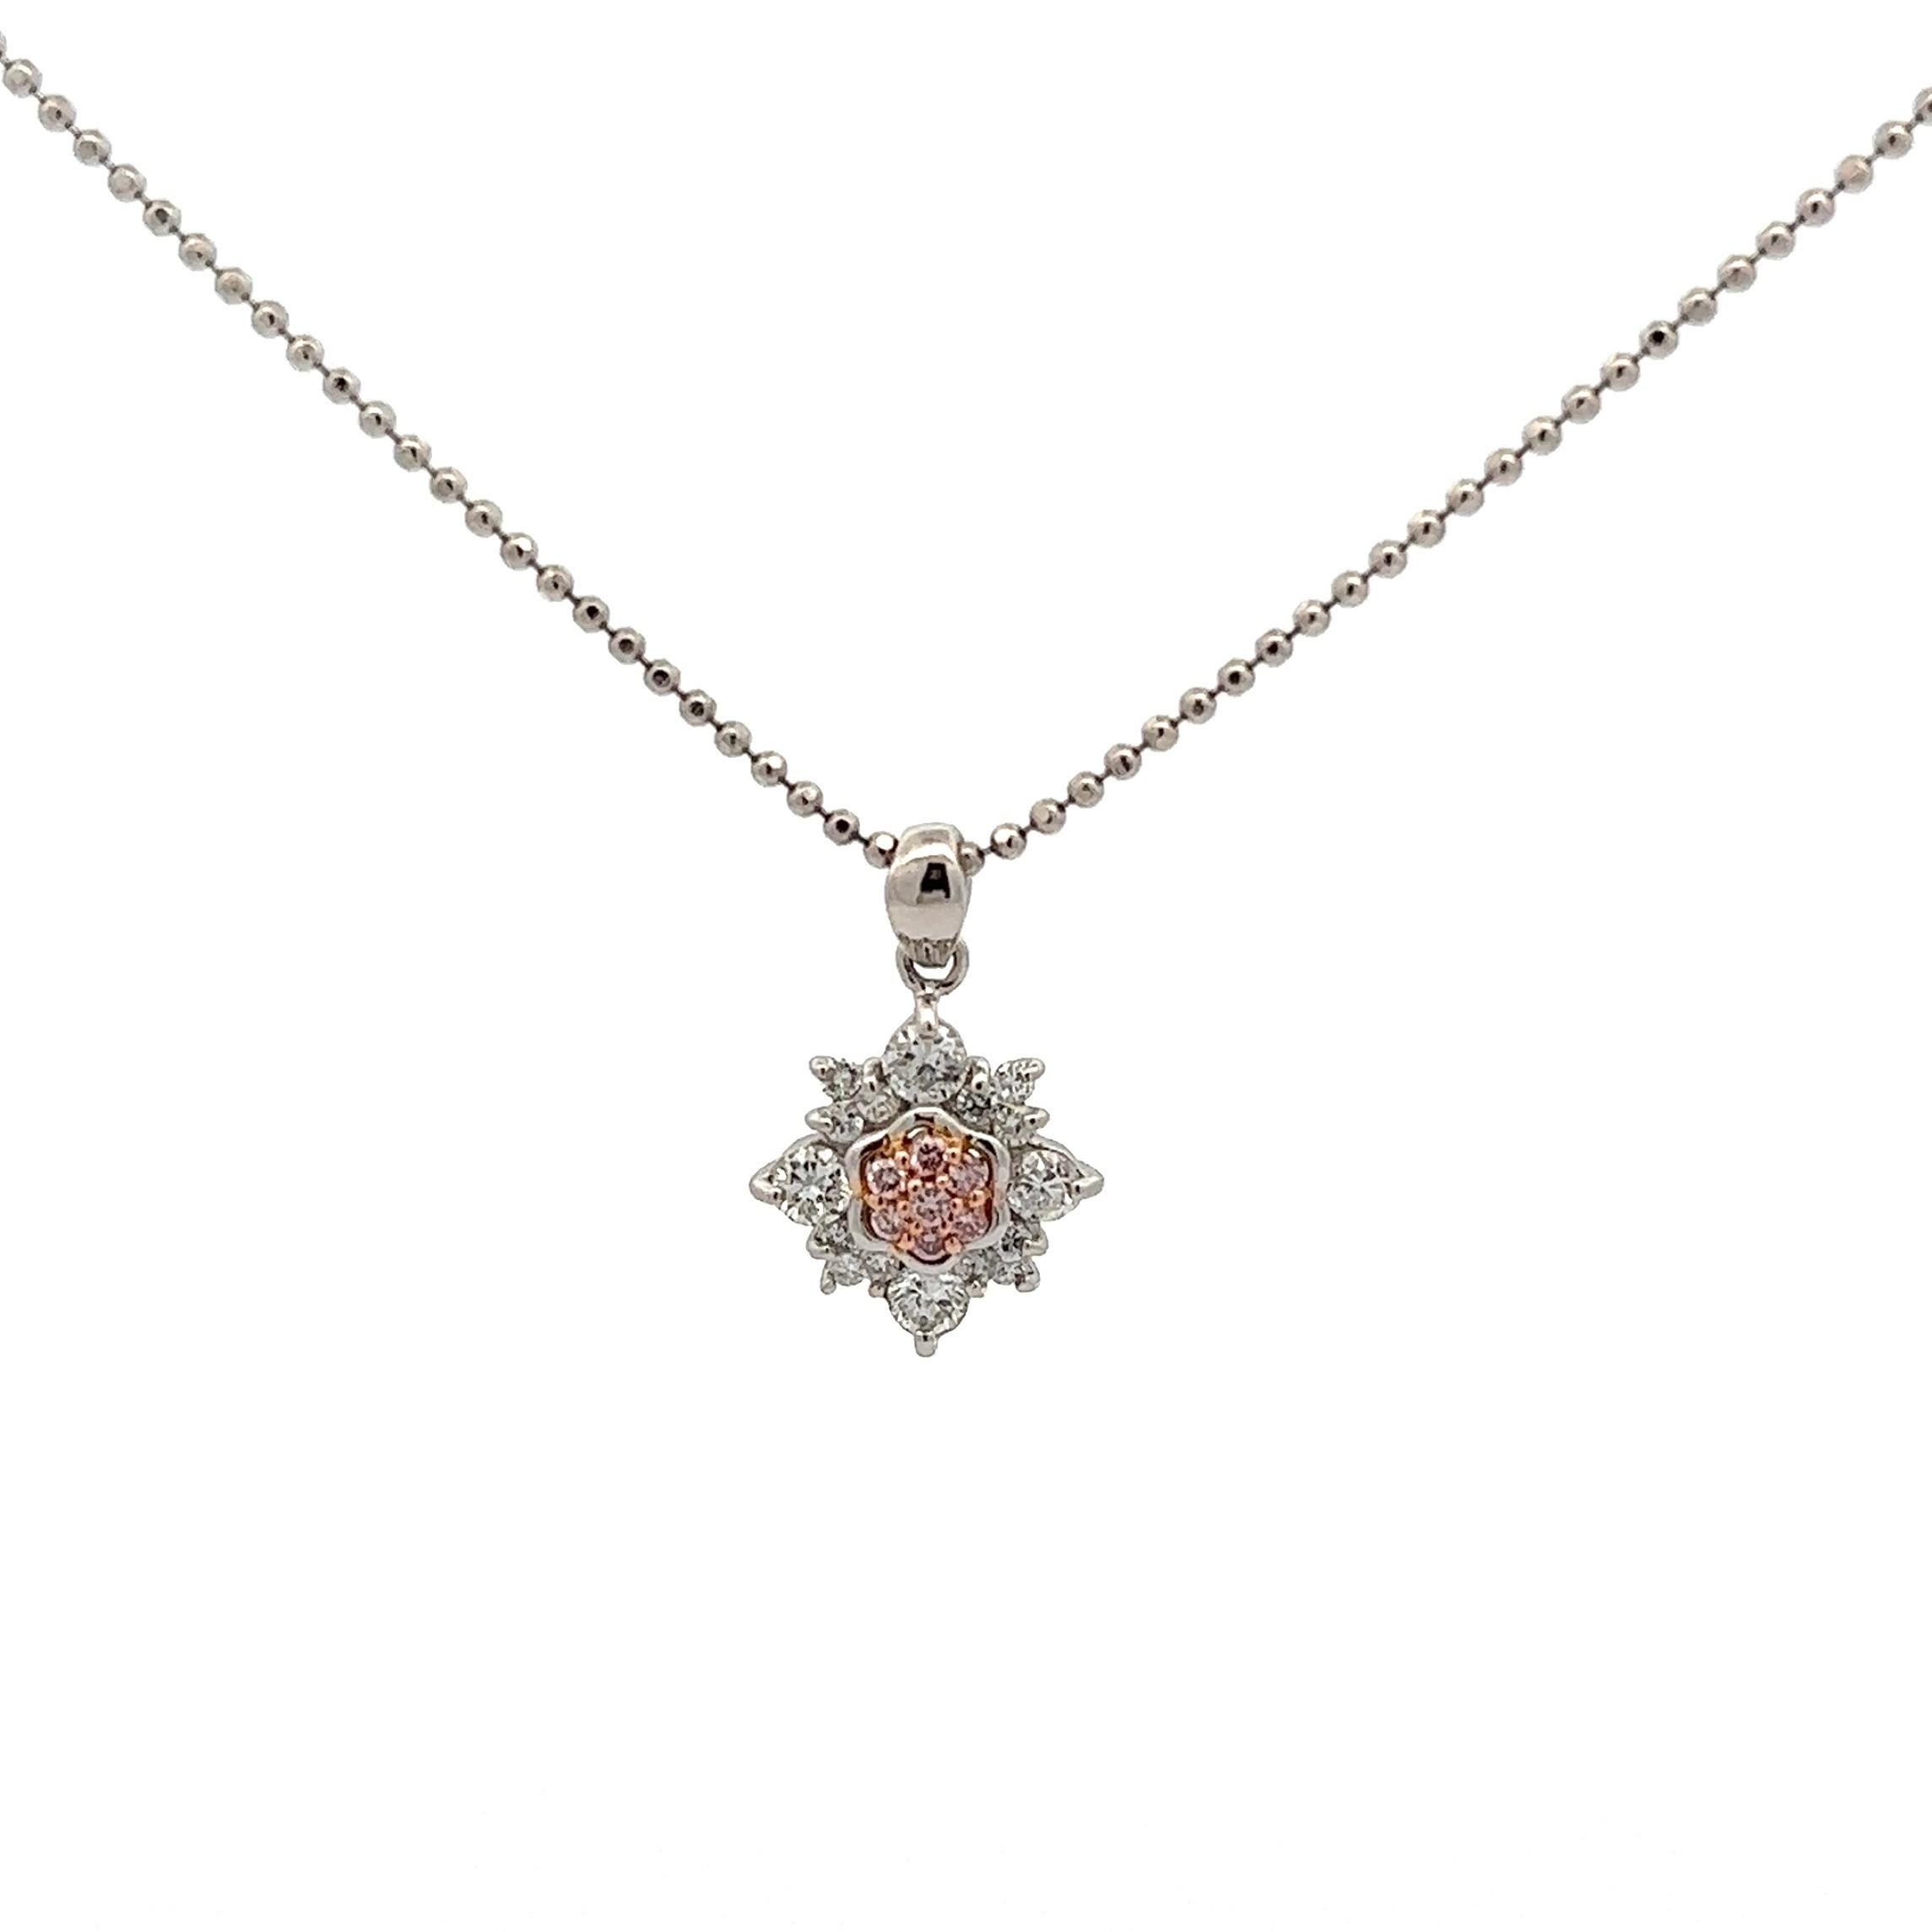 Simply Beautiful! Diamond Platinum Cluster Star Drop Pendant Necklace. Centering securely Hand set 0.06 Carat Pink Sapphires, surrounded by Diamonds approx. 0.45tcw. Suspended from a Ball Link Chain, approx. 16” long. Pendant dimensions: 0.68” L x